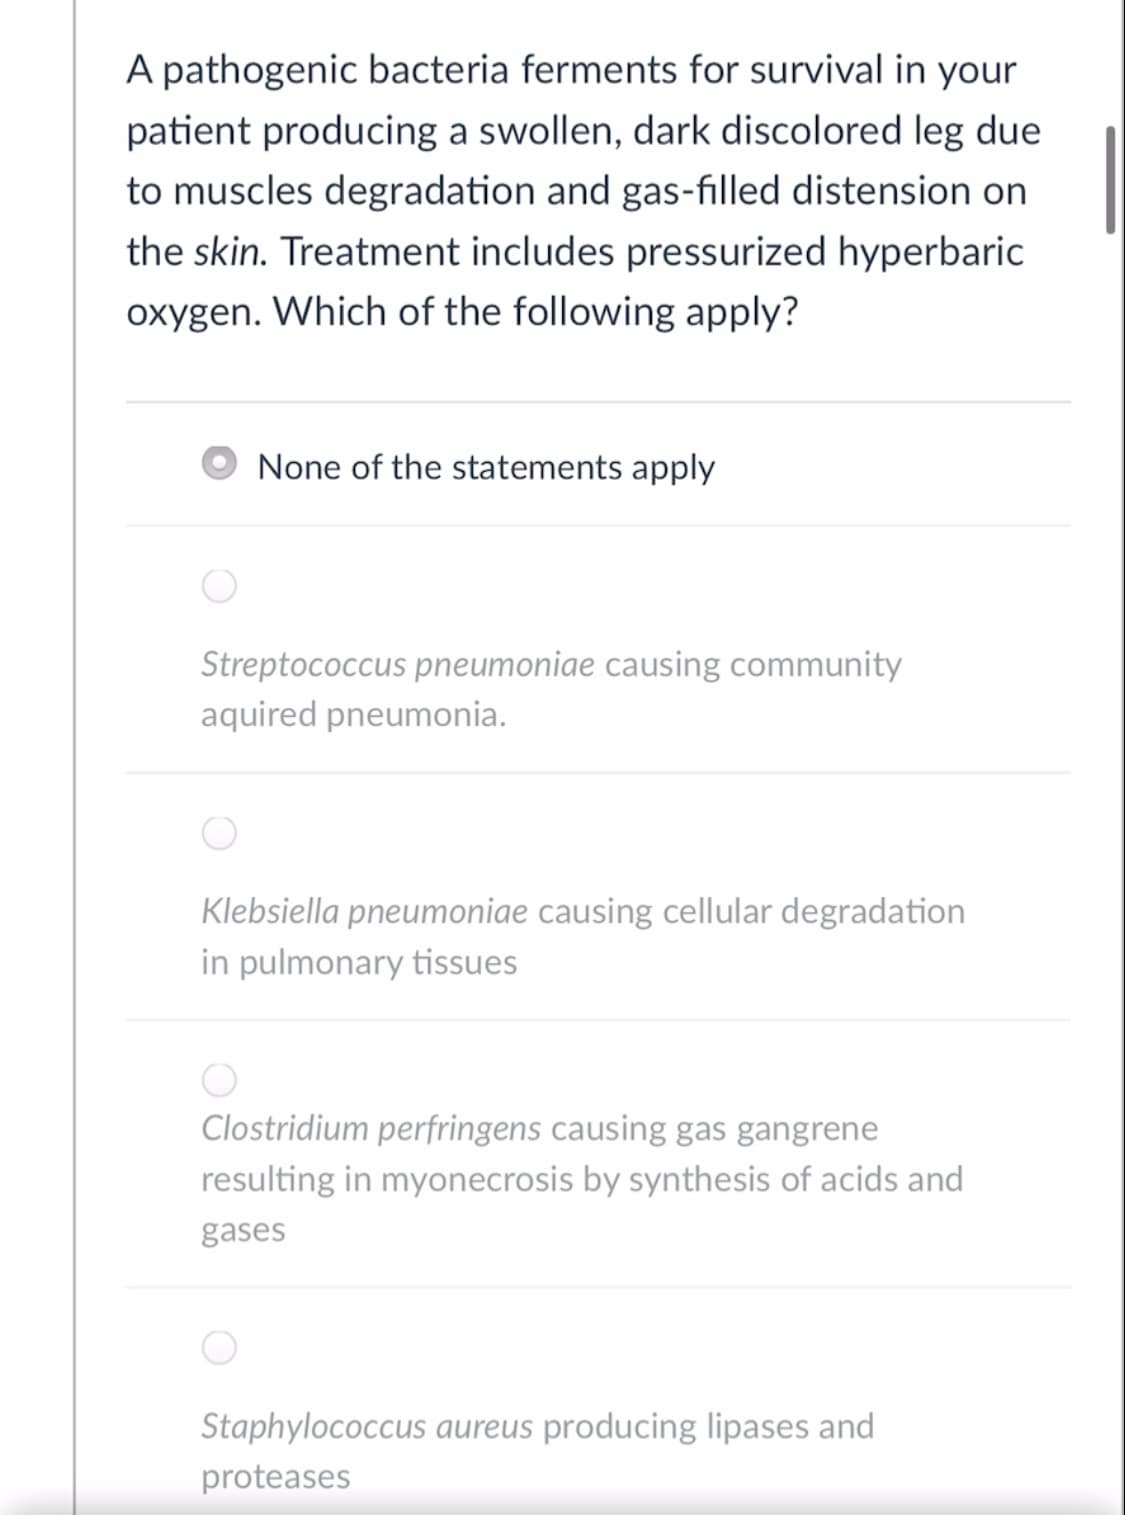 A pathogenic bacteria ferments for survival in your
patient producing a swollen, dark discolored leg due
to muscles degradation and gas-filled distension on
the skin. Treatment includes pressurized hyperbaric
oxygen. Which of the following apply?
None of the statements apply
Streptococcus pneumoniae causing community
aquired pneumonia.
Klebsiella pneumoniae causing cellular degradation
in pulmonary tissues
Clostridium perfringens causing gas gangrene
resulting in myonecrosis by synthesis of acids and
gases
Staphylococcus aureus producing lipases and
proteases
